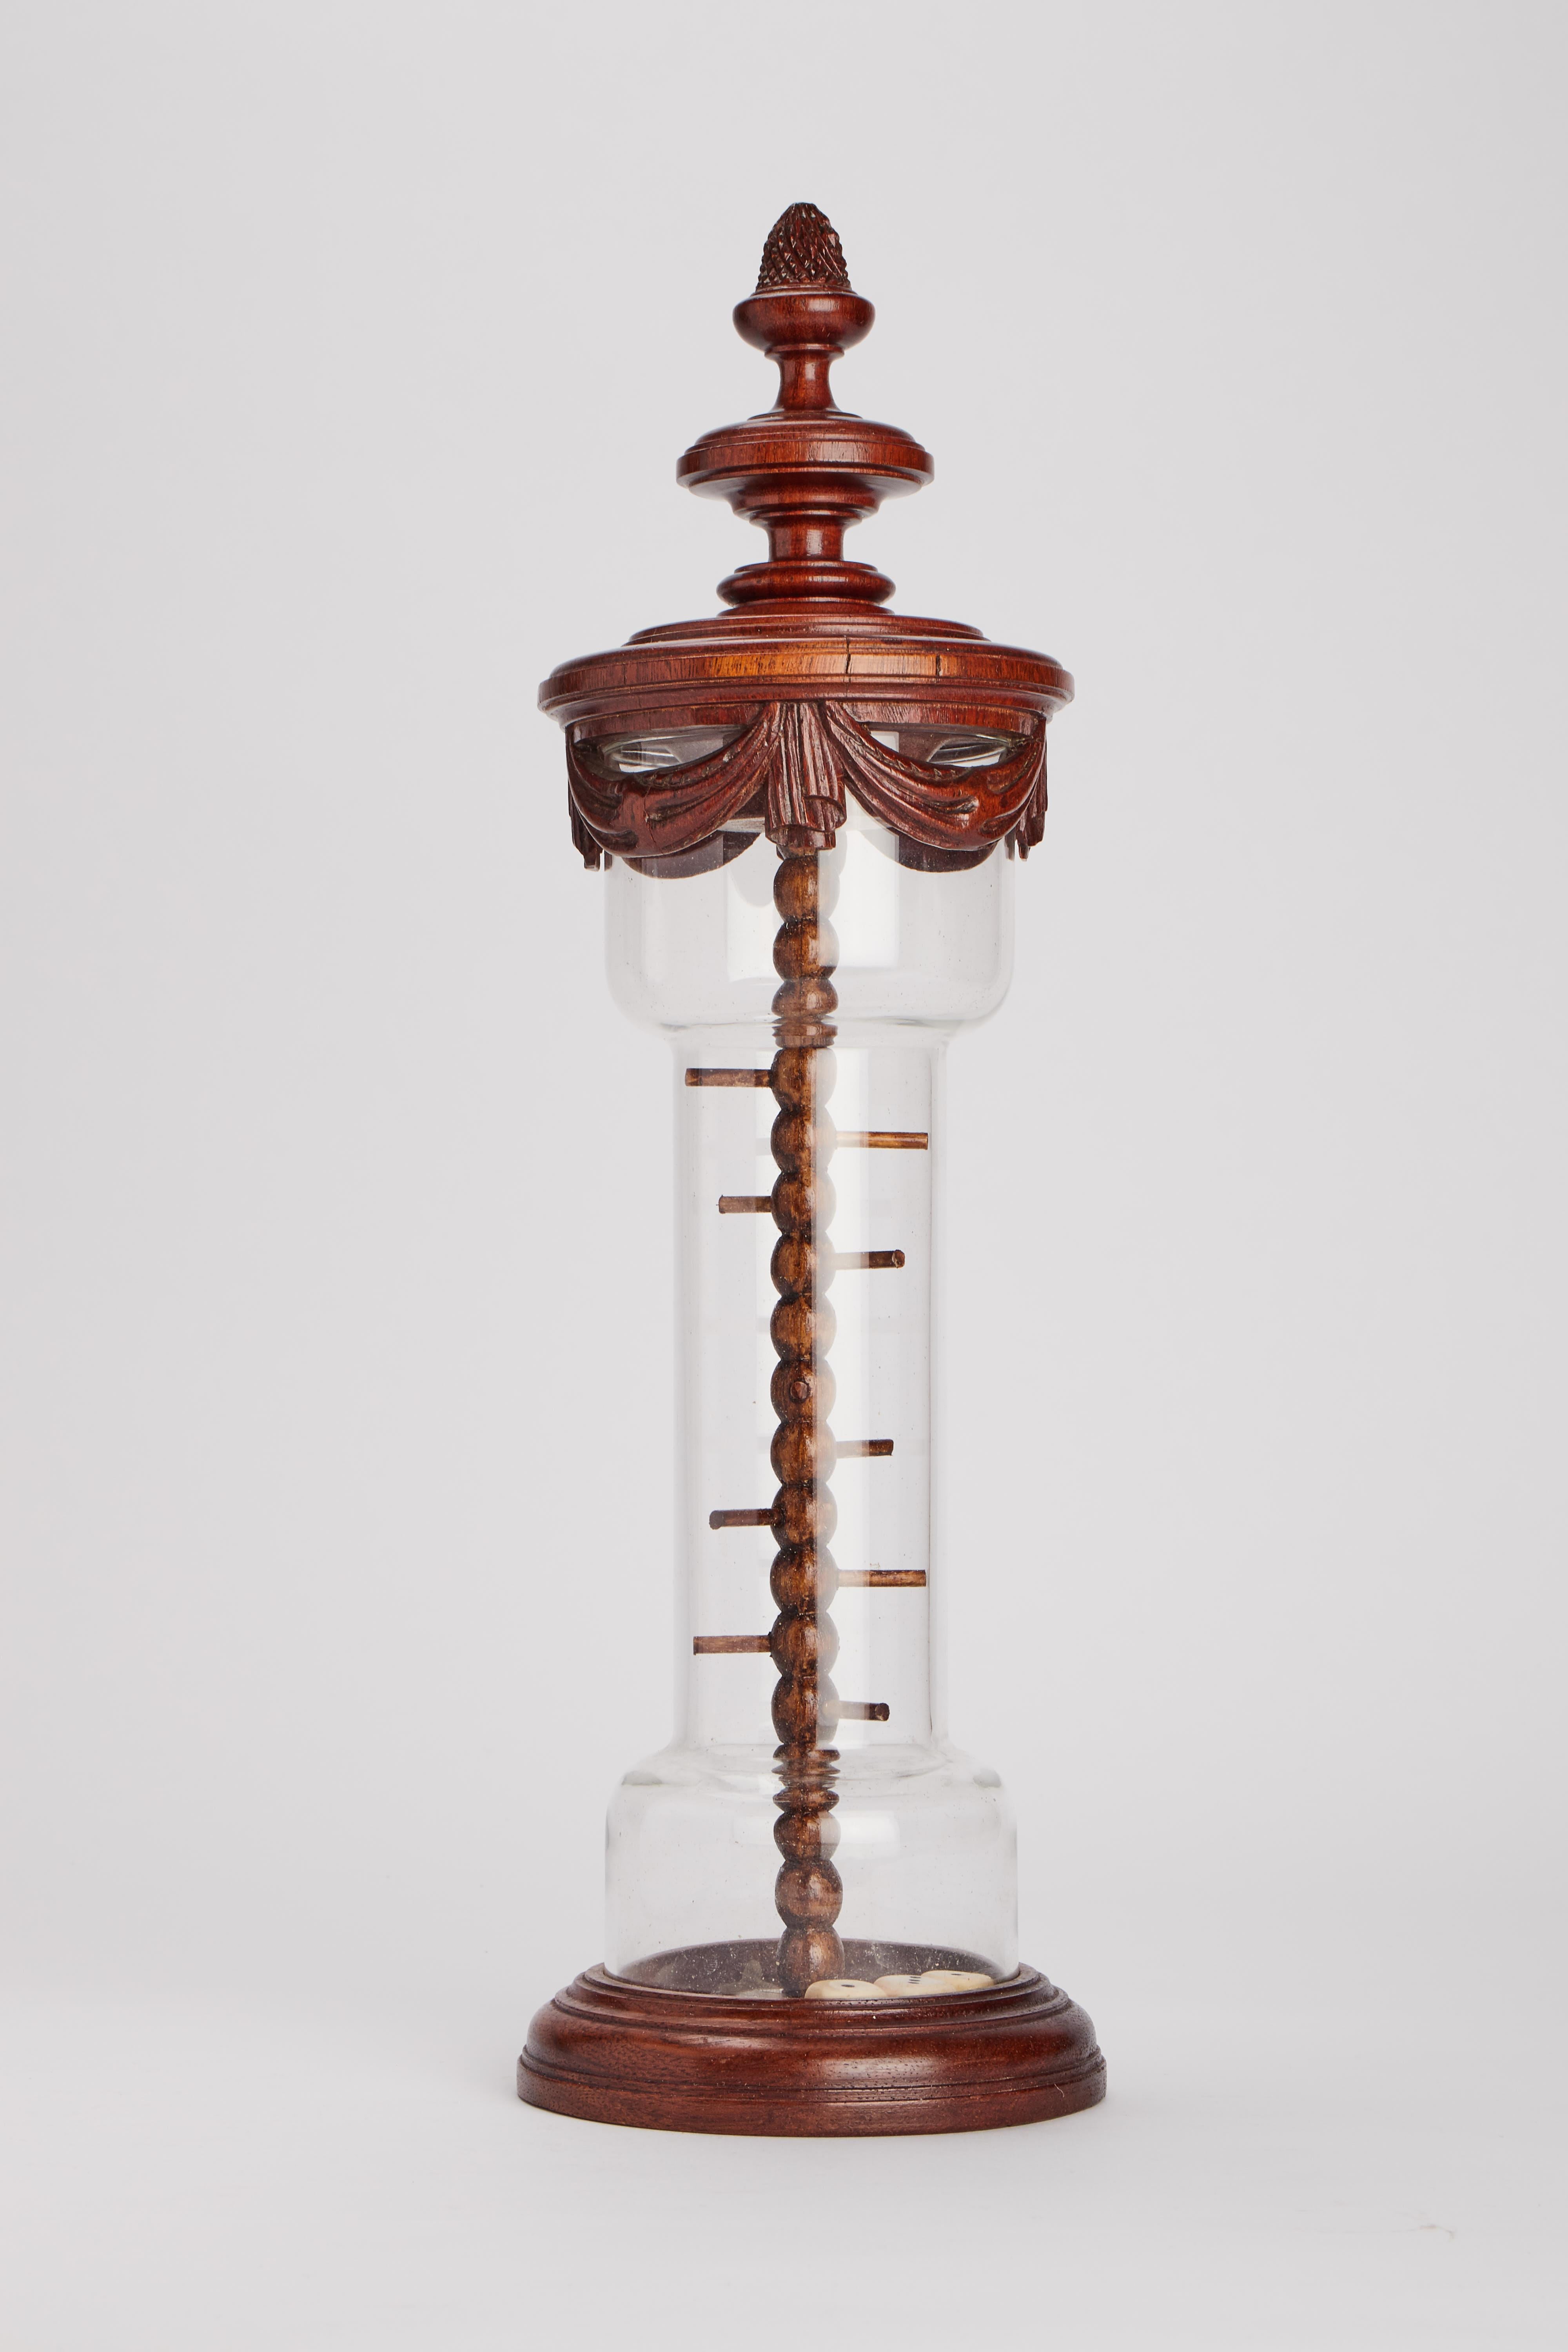 A board game with dice.
Base, lid and central element are in oak wood, the cylinder is in glass containing three dice. France late 19th century.
